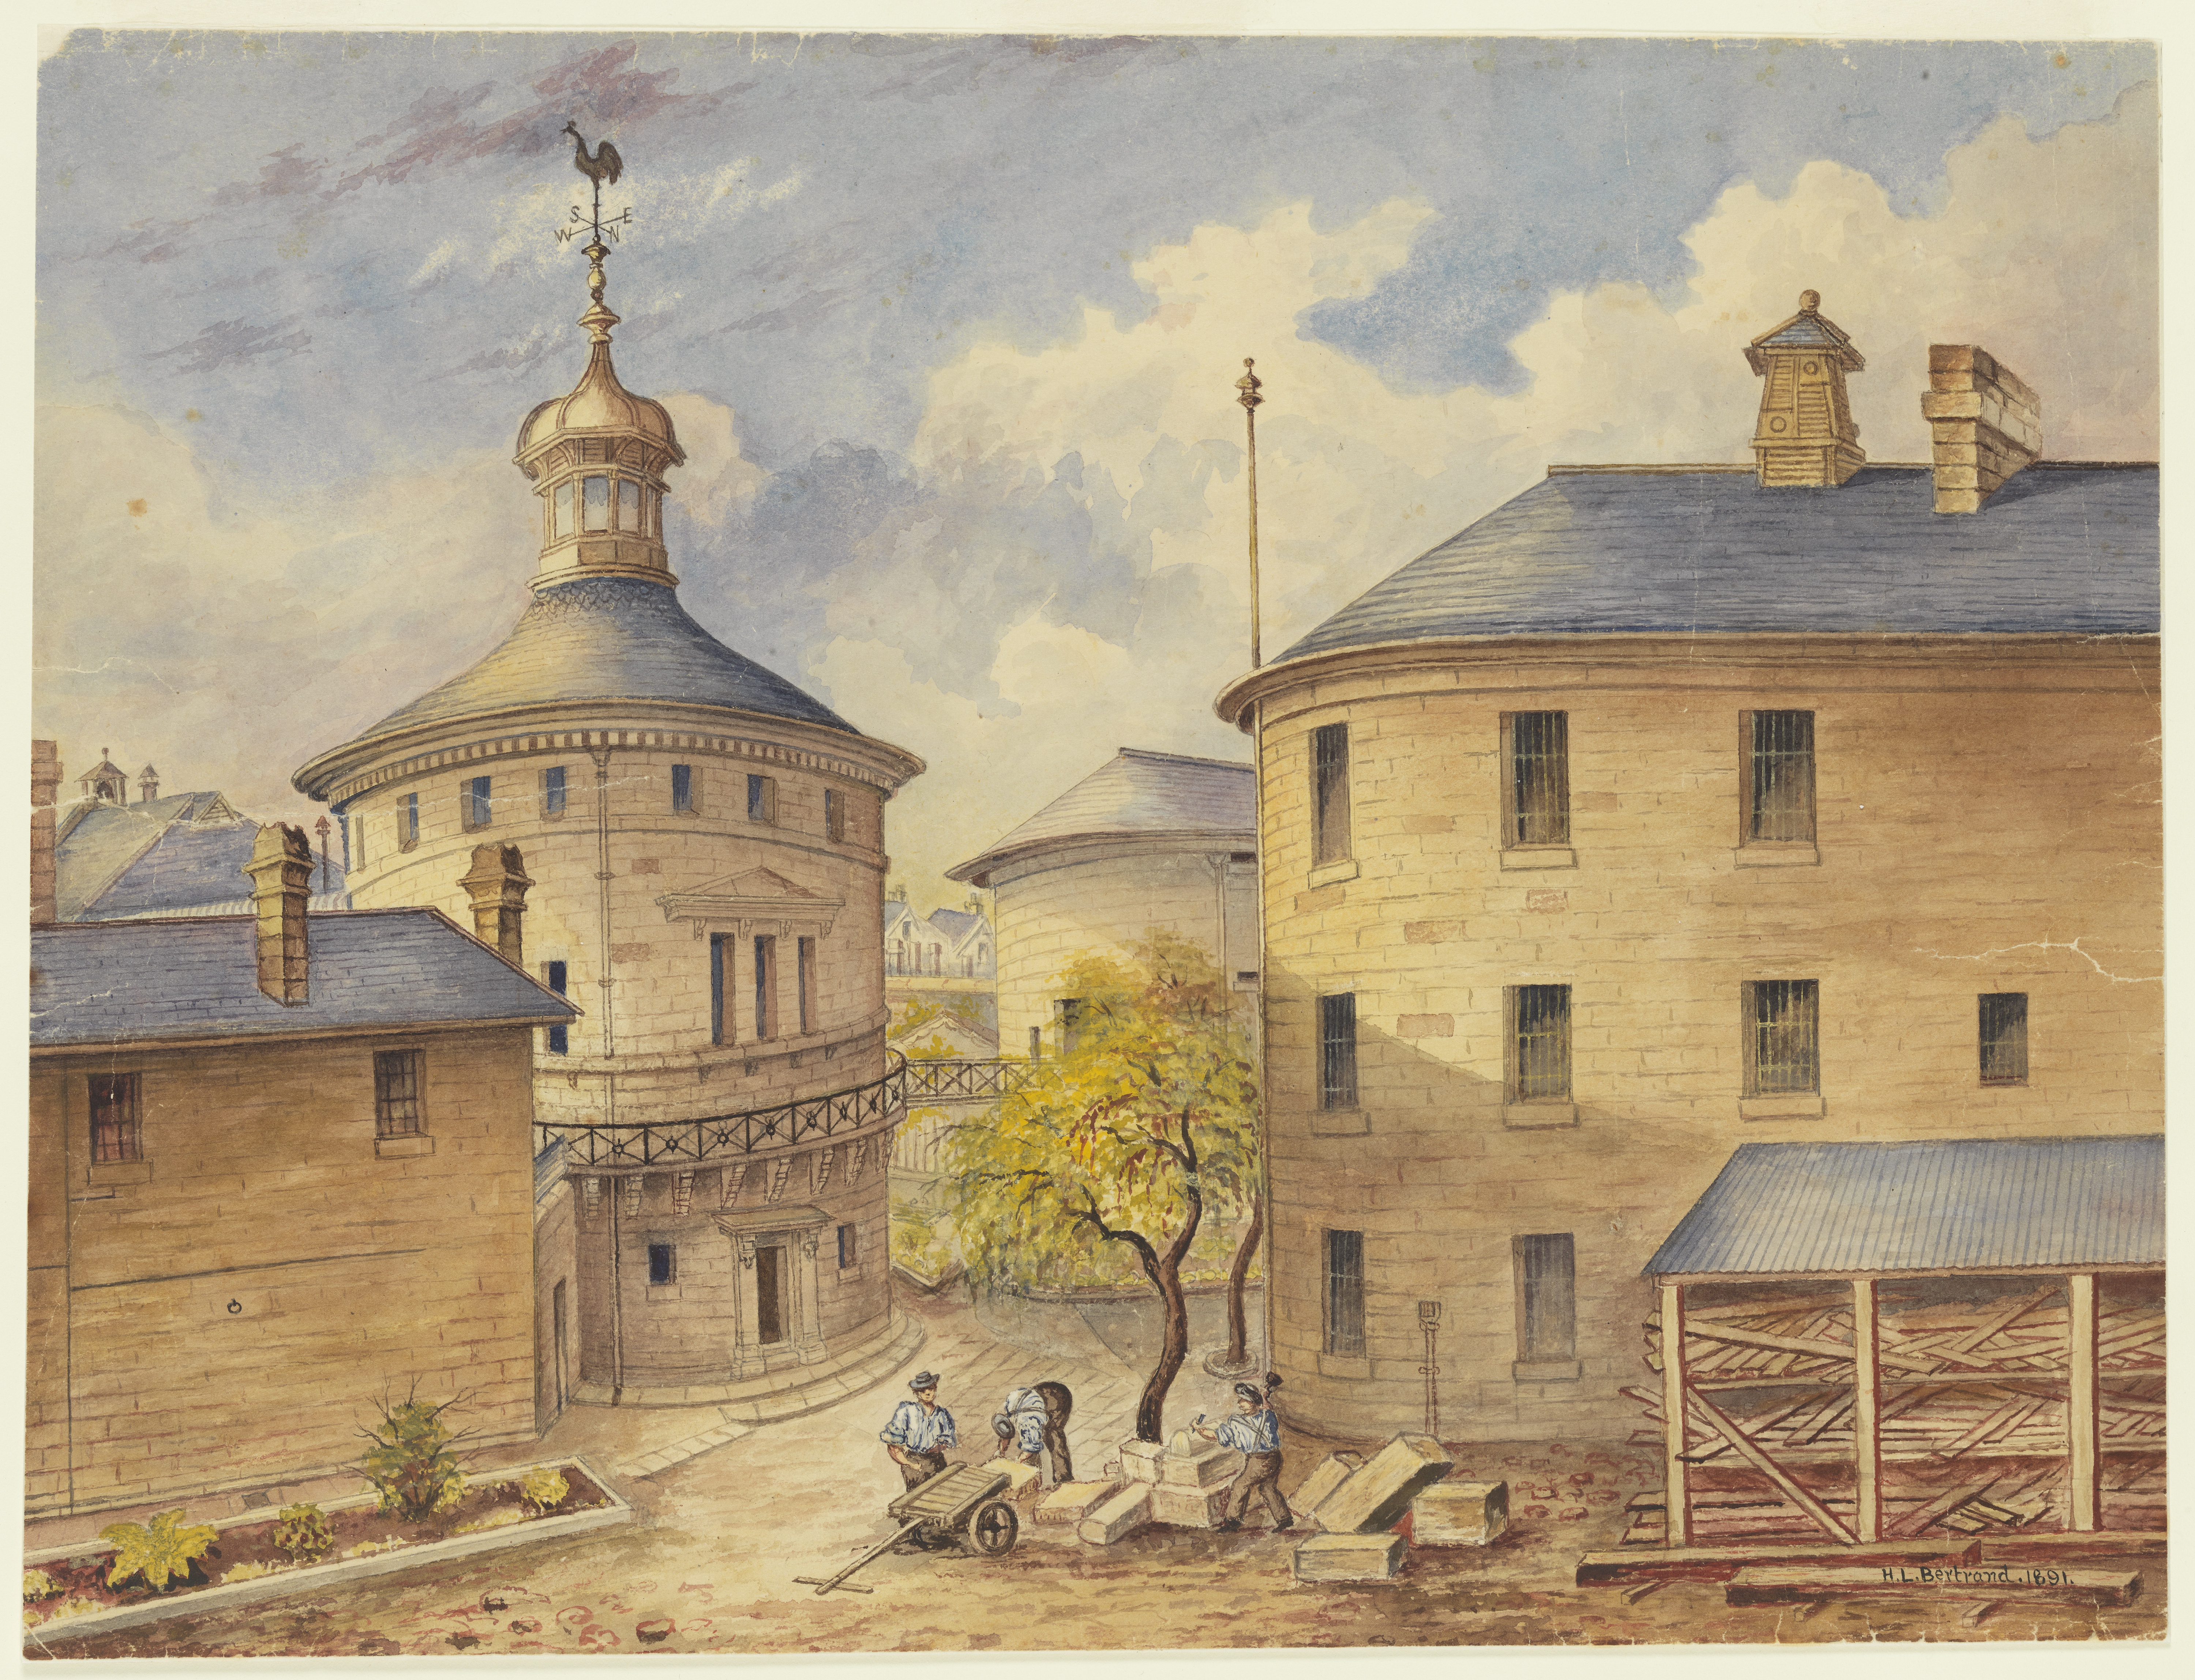 watercolour painting on colonial sandstone buildings